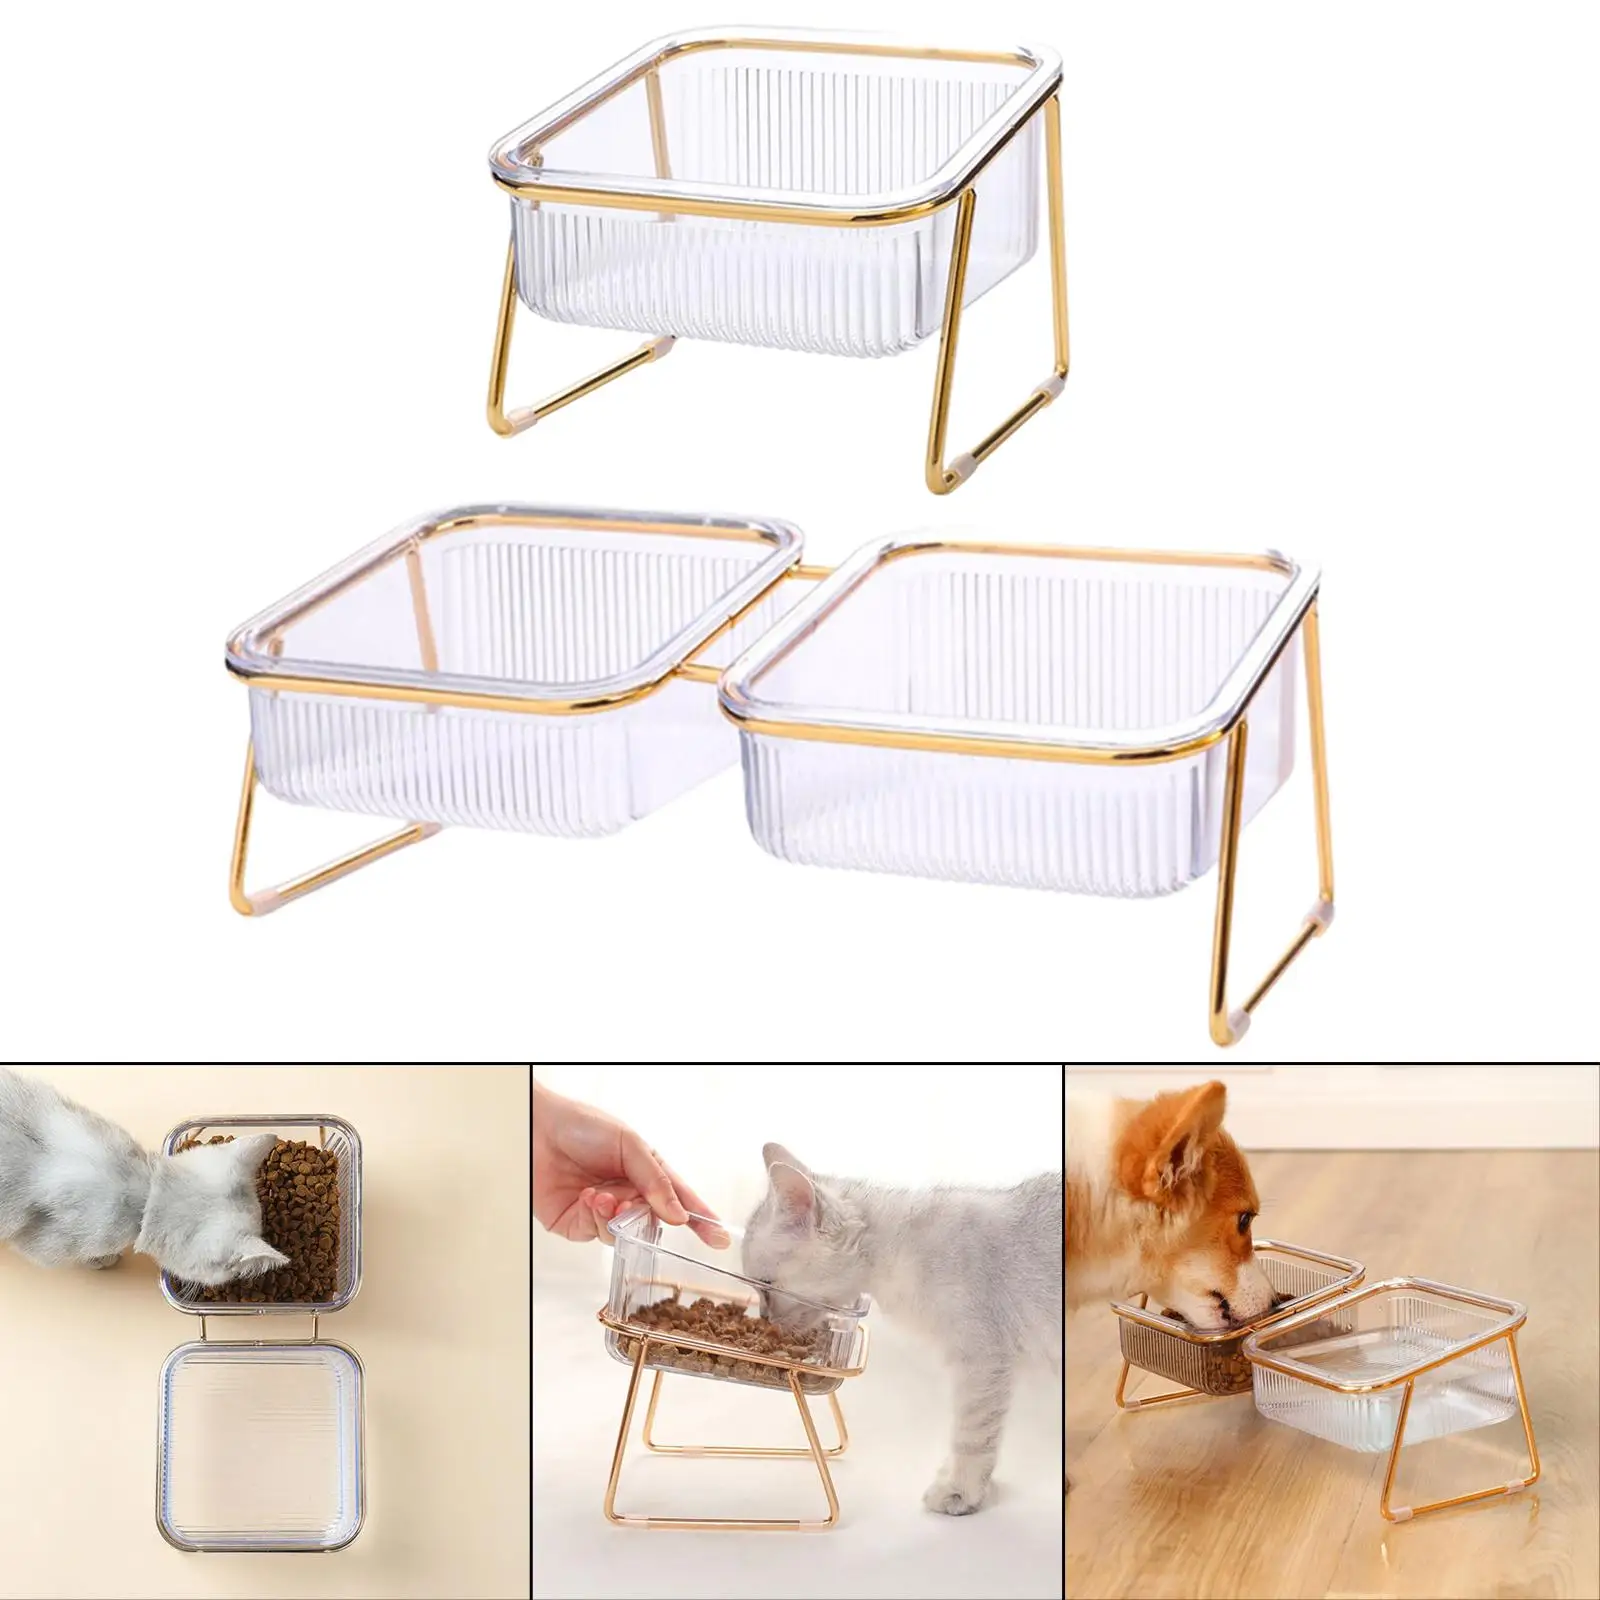 Detachable Pets Dogs Cat Raised Elevated Bowl Feeder Nonslip Pets Supplies